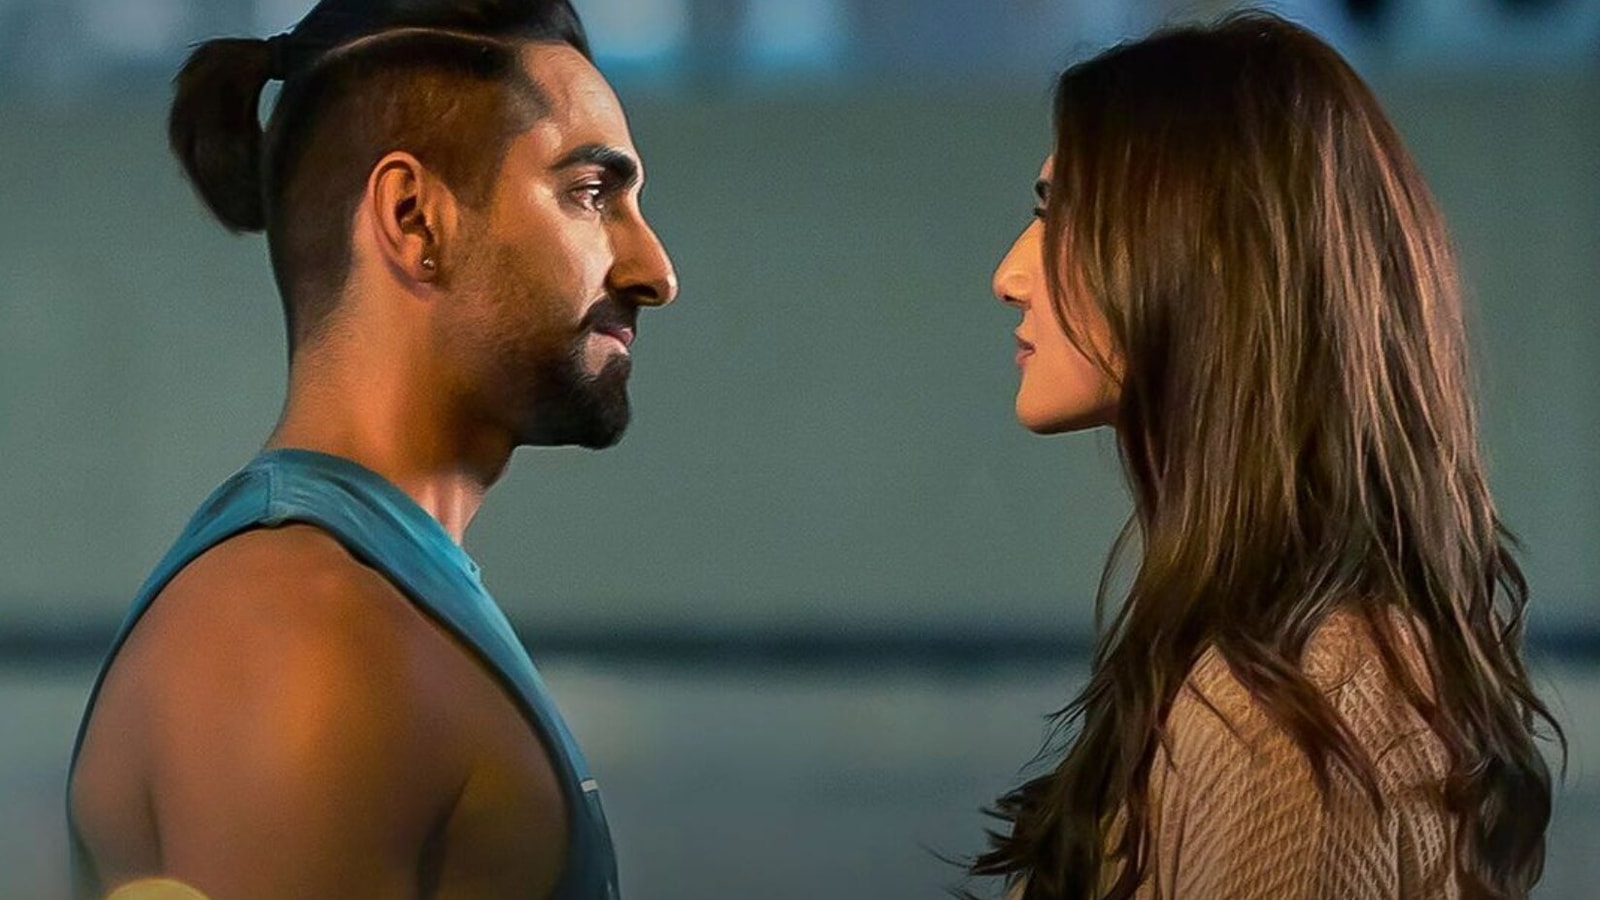 Chandigarh Kare Aashiqui review Refreshingly different; Vaani Kapoor steals show, Ayushmann Khurrana scores well Bollywood pic